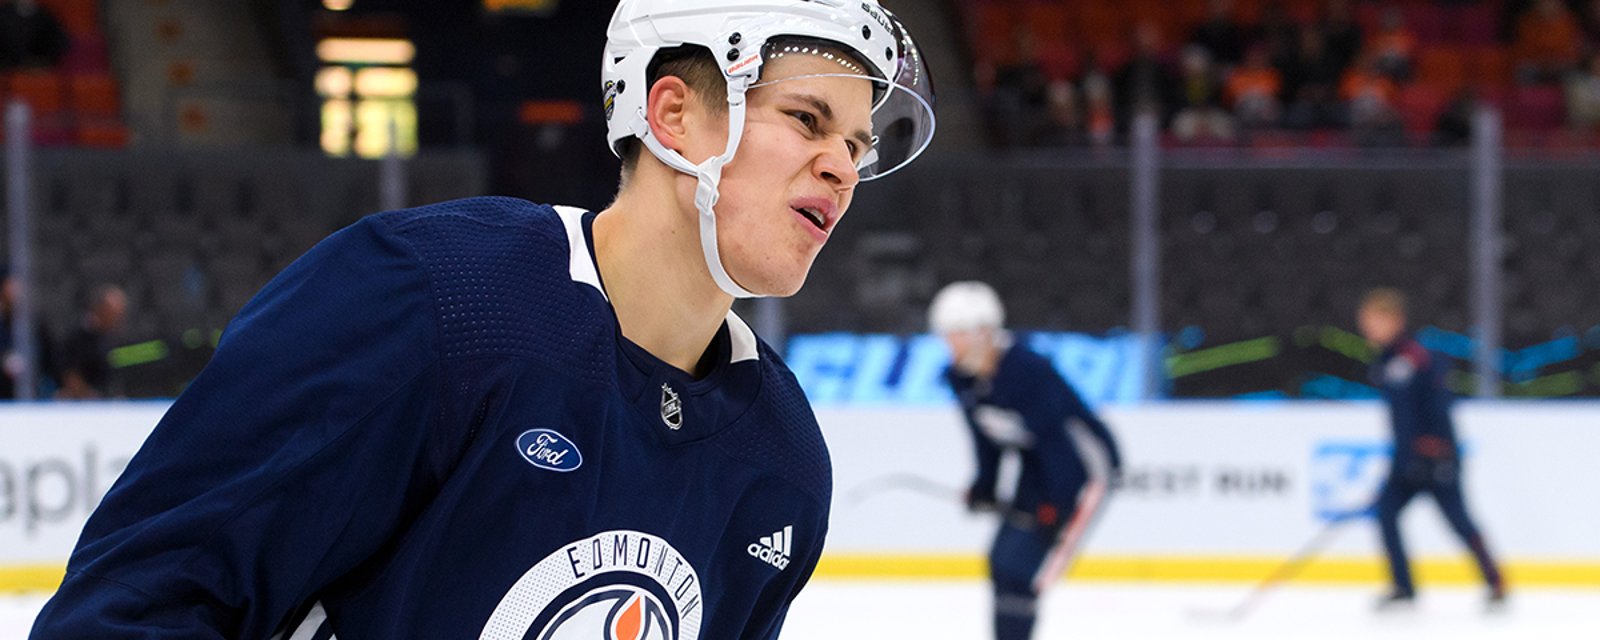 Report: Puljujarvi seen leaving Oilers dressing room “carrying a bunch of hockey sticks” 